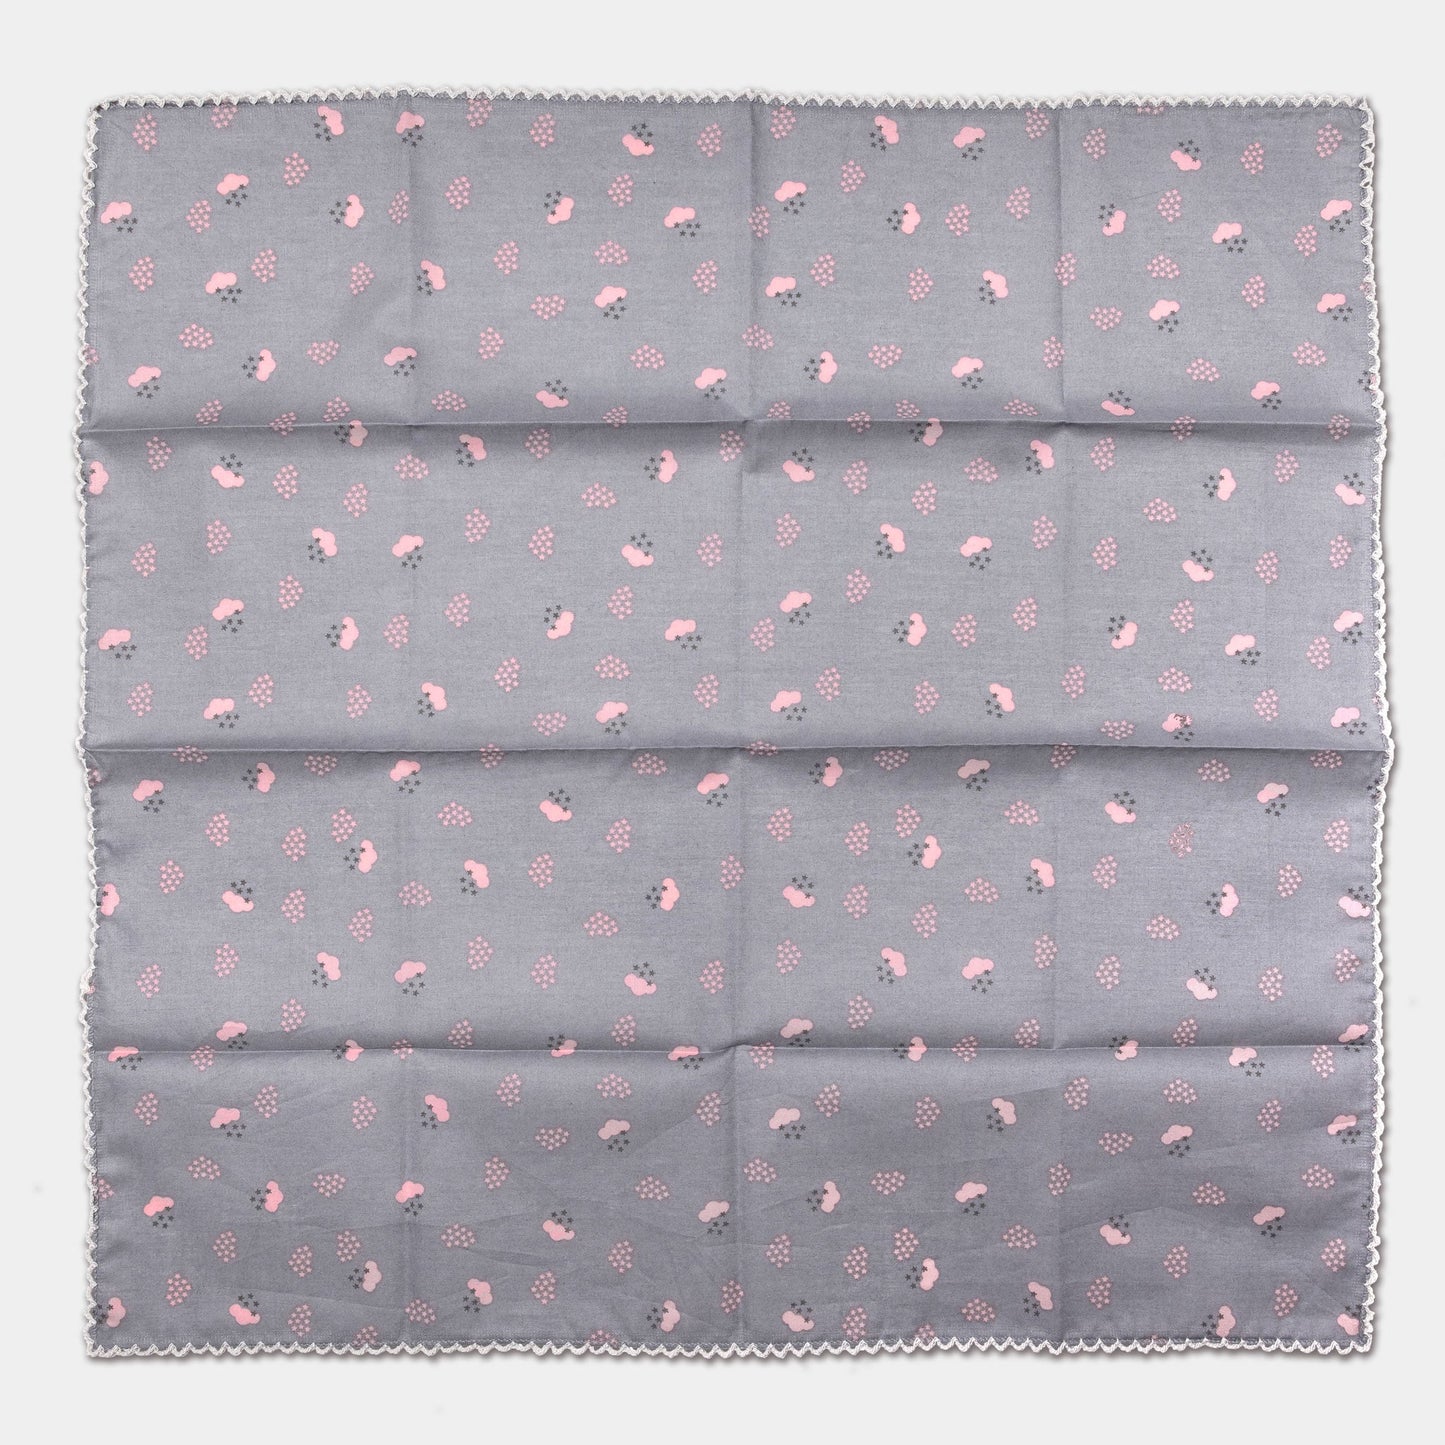 Cloud Print Cotton Scarf Grey and Pink Flat